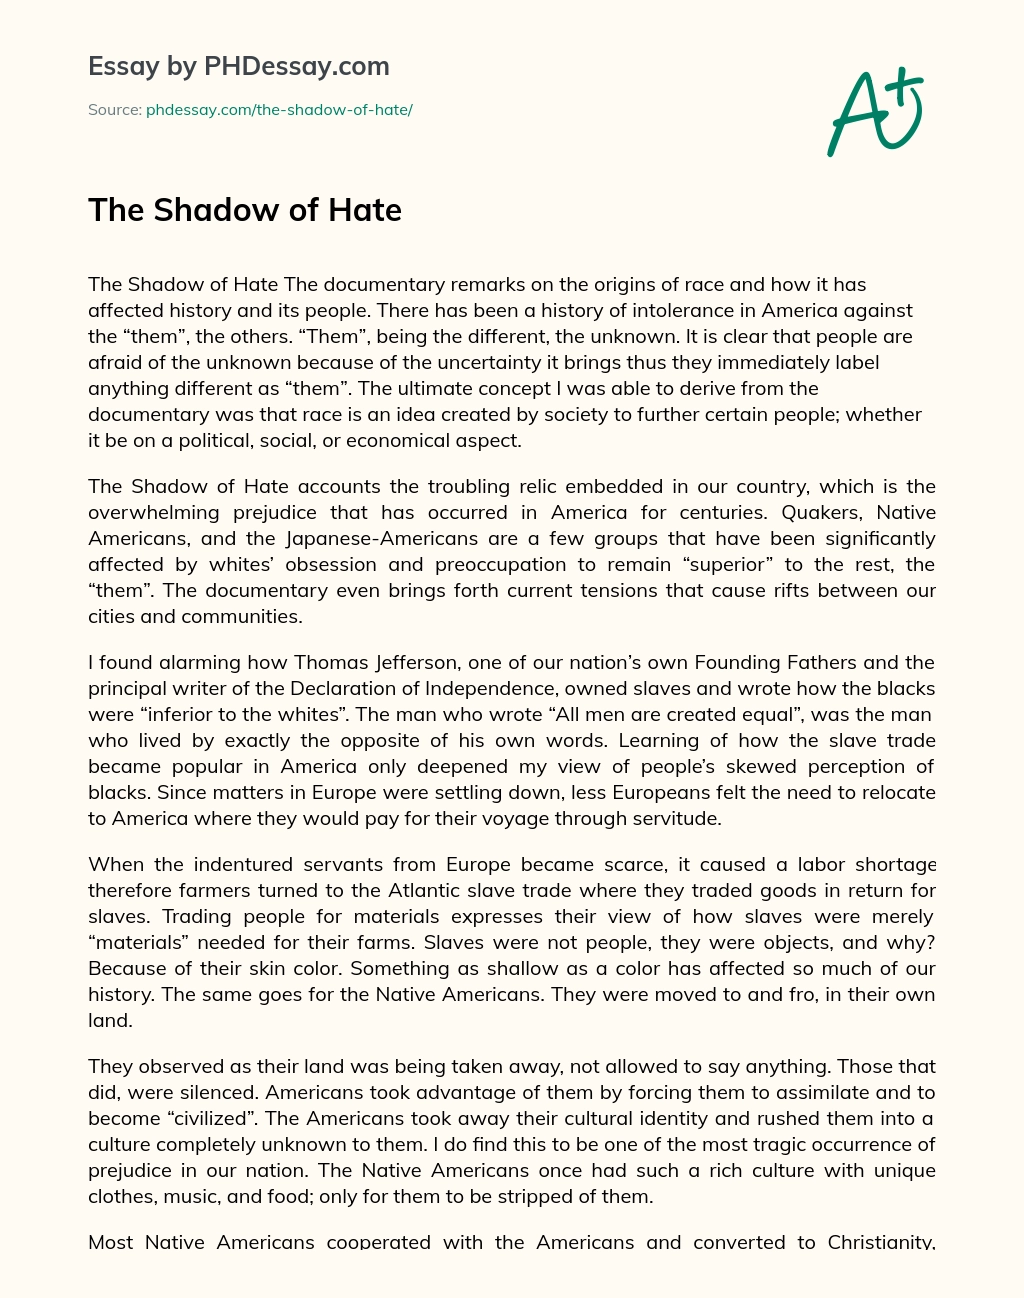 The Shadow of Hate essay